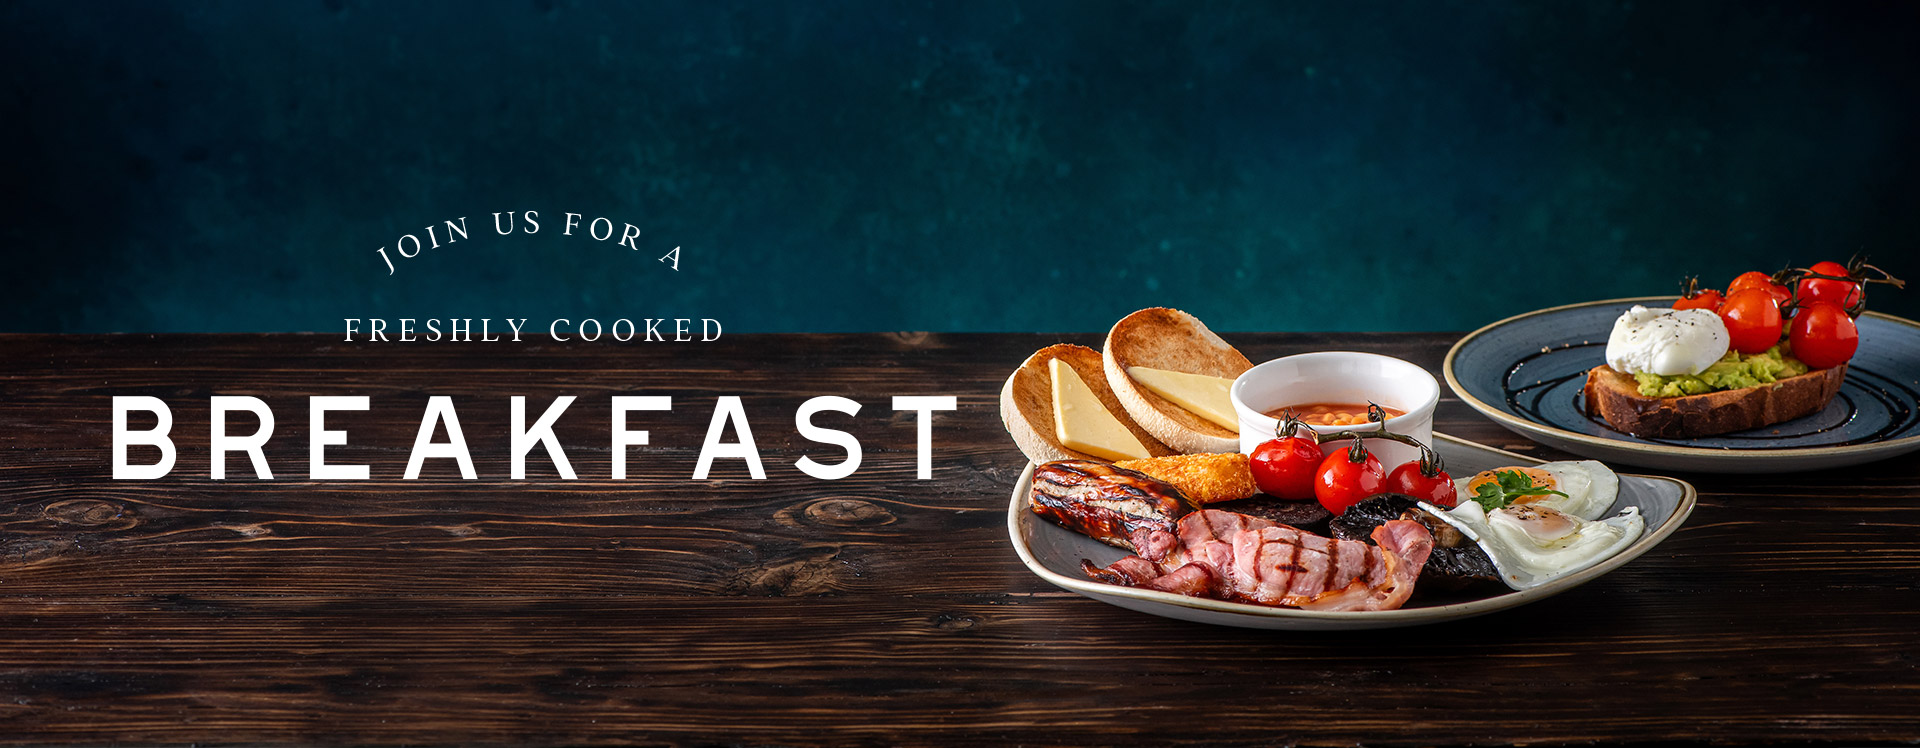 Breakfast at Rose Street Brewery - Book a table